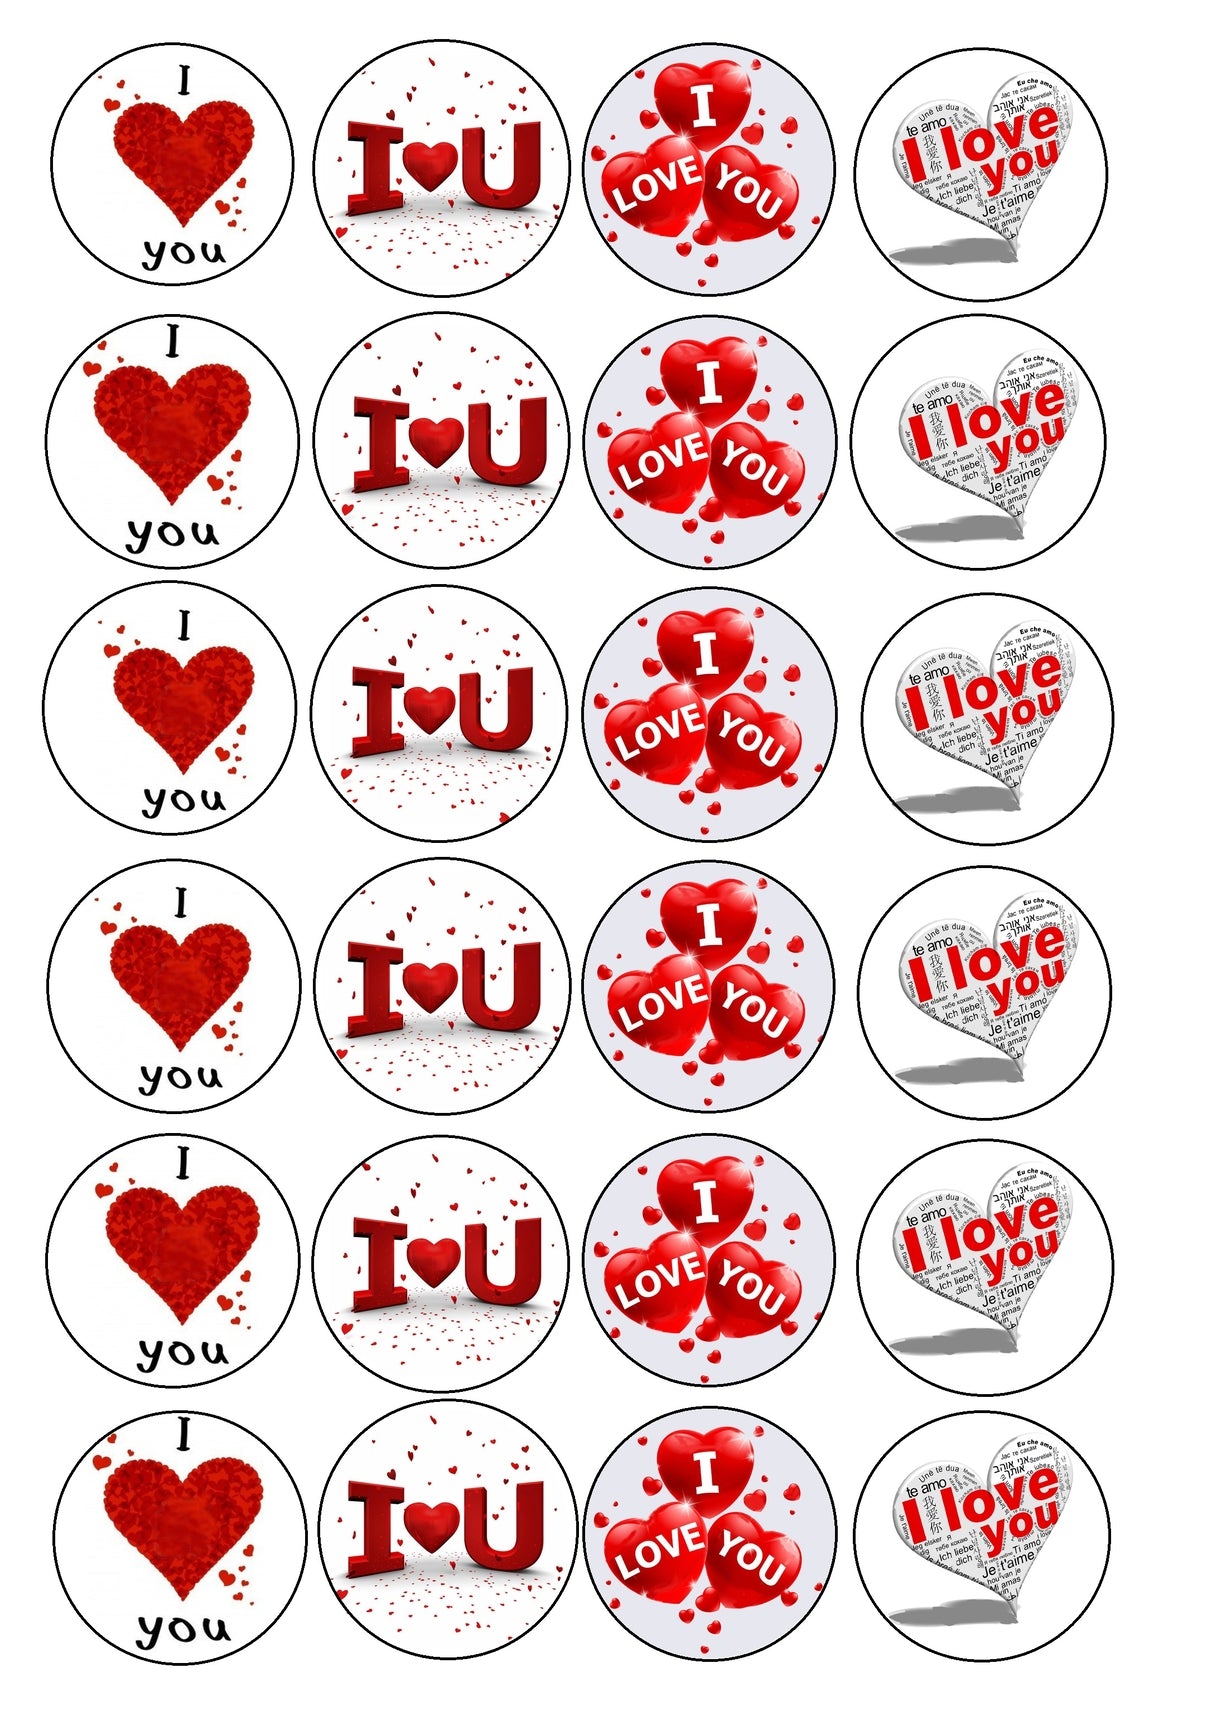 Love Letters Edible Cupcake Toppers